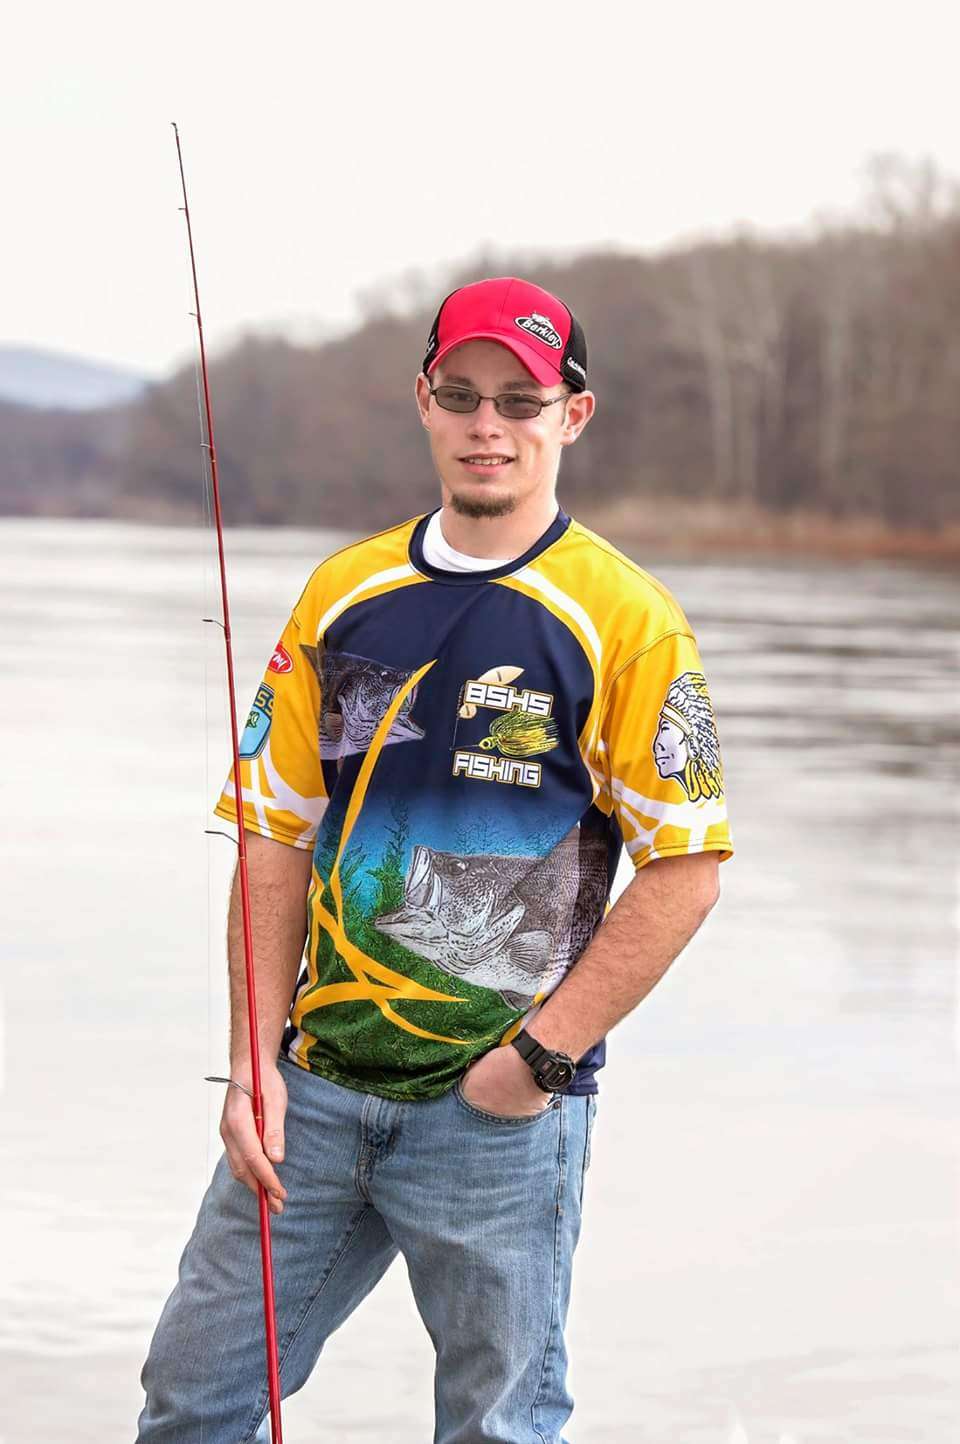 <b>West Virginia: Brad Knotts</b><br>
Knotts is a member of the Berkeley Springs High School bass fishing club and has earned two first-place finishes on the Potomac River.  He helped organize his high schoolâs bass fishing team and is currently serving as club president.
